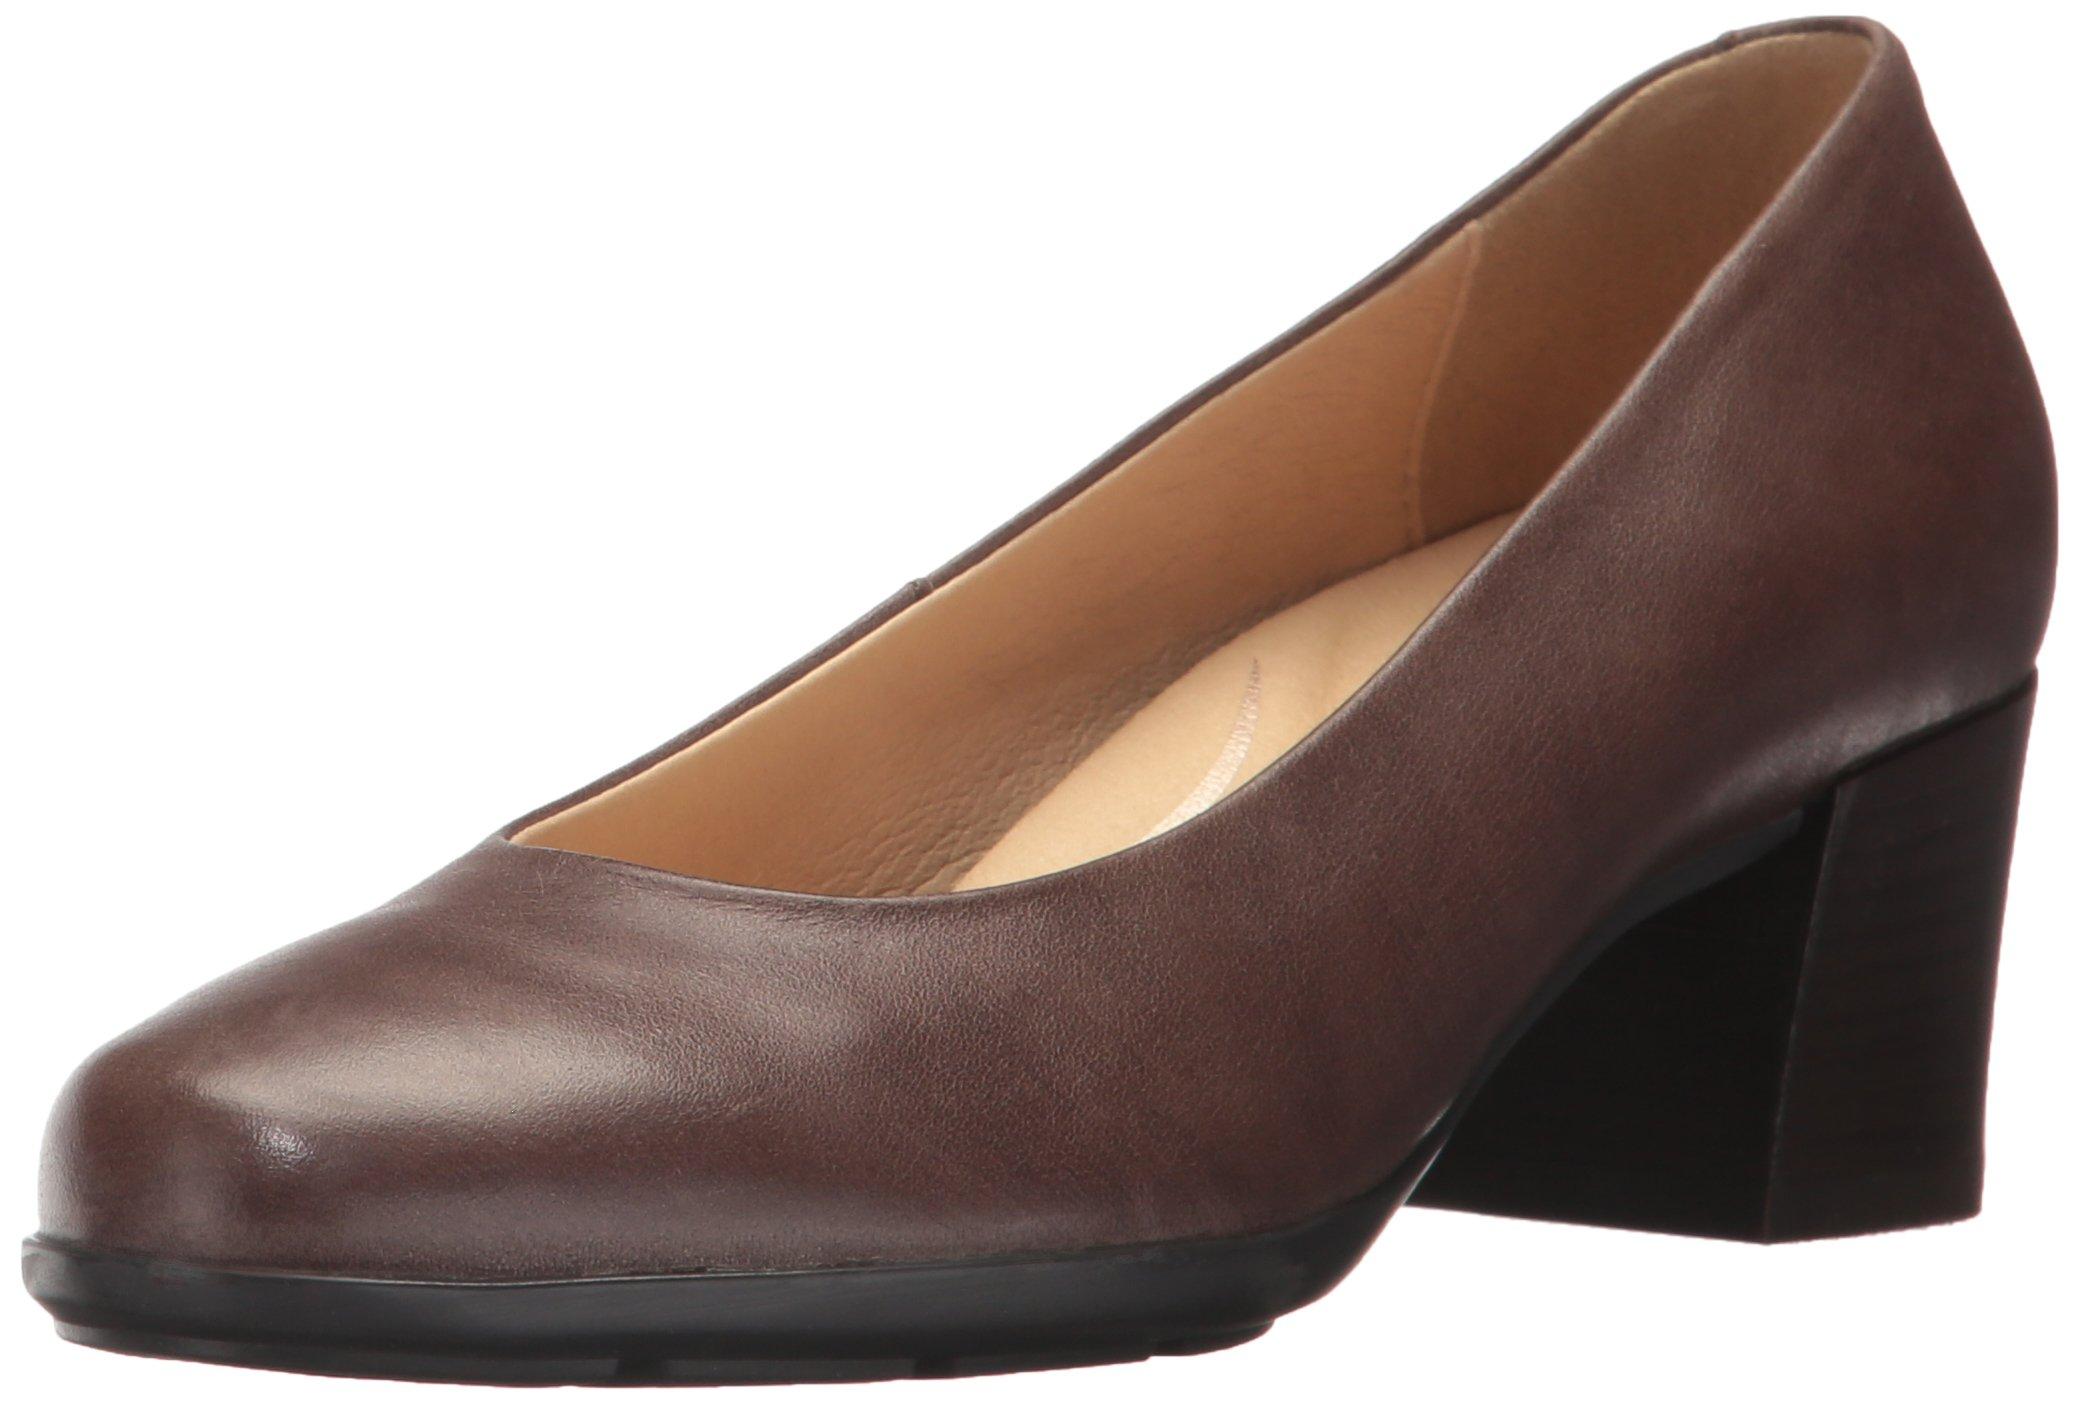 Geox Annya Mid 2 Dress Pump in Taupe (Brown) - Save 76% - Lyst